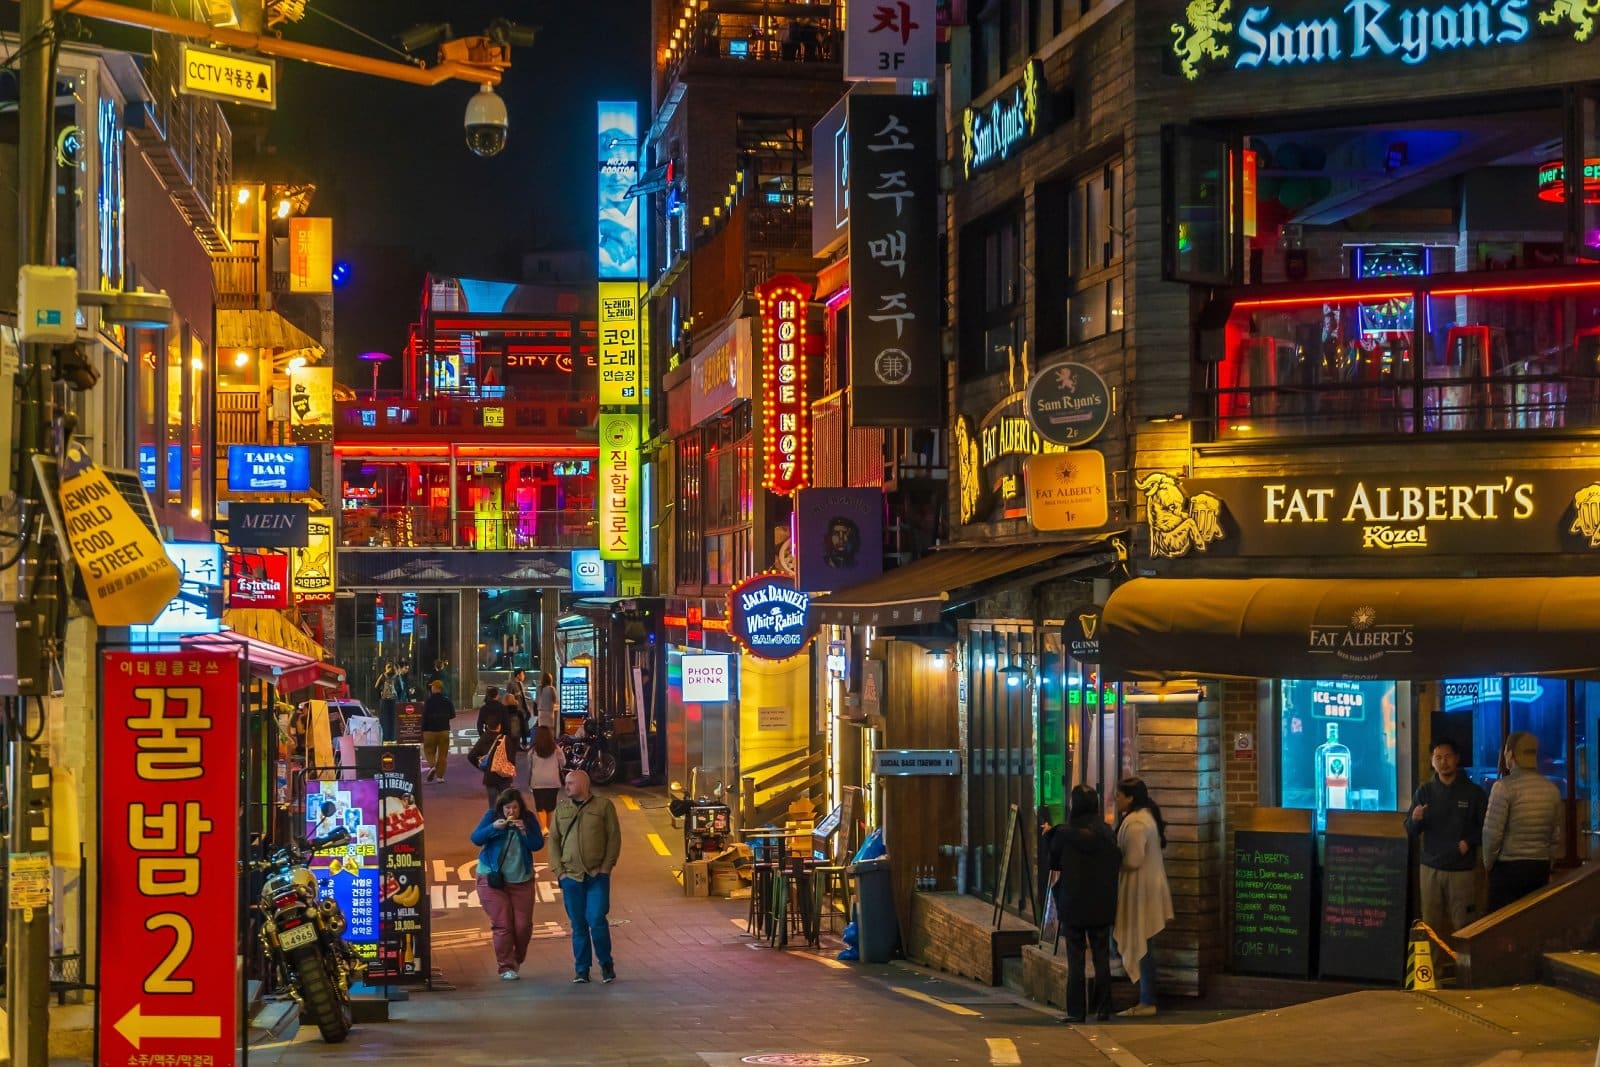 <p class="wp-caption-text">Image Credit: Shutterstock / f11photo</p>  <p><span>Itaewon is Seoul’s most international district, known for its diverse culture, cuisine, and nightlife. The neighborhood is a melting pot of cultures, offering various restaurants, bars, and clubs catering to locals and expats. Itaewon is also famous for its custom tailoring shops and international food market, making it a go-to destination for those looking to experience a different side of Seoul.</span></p>